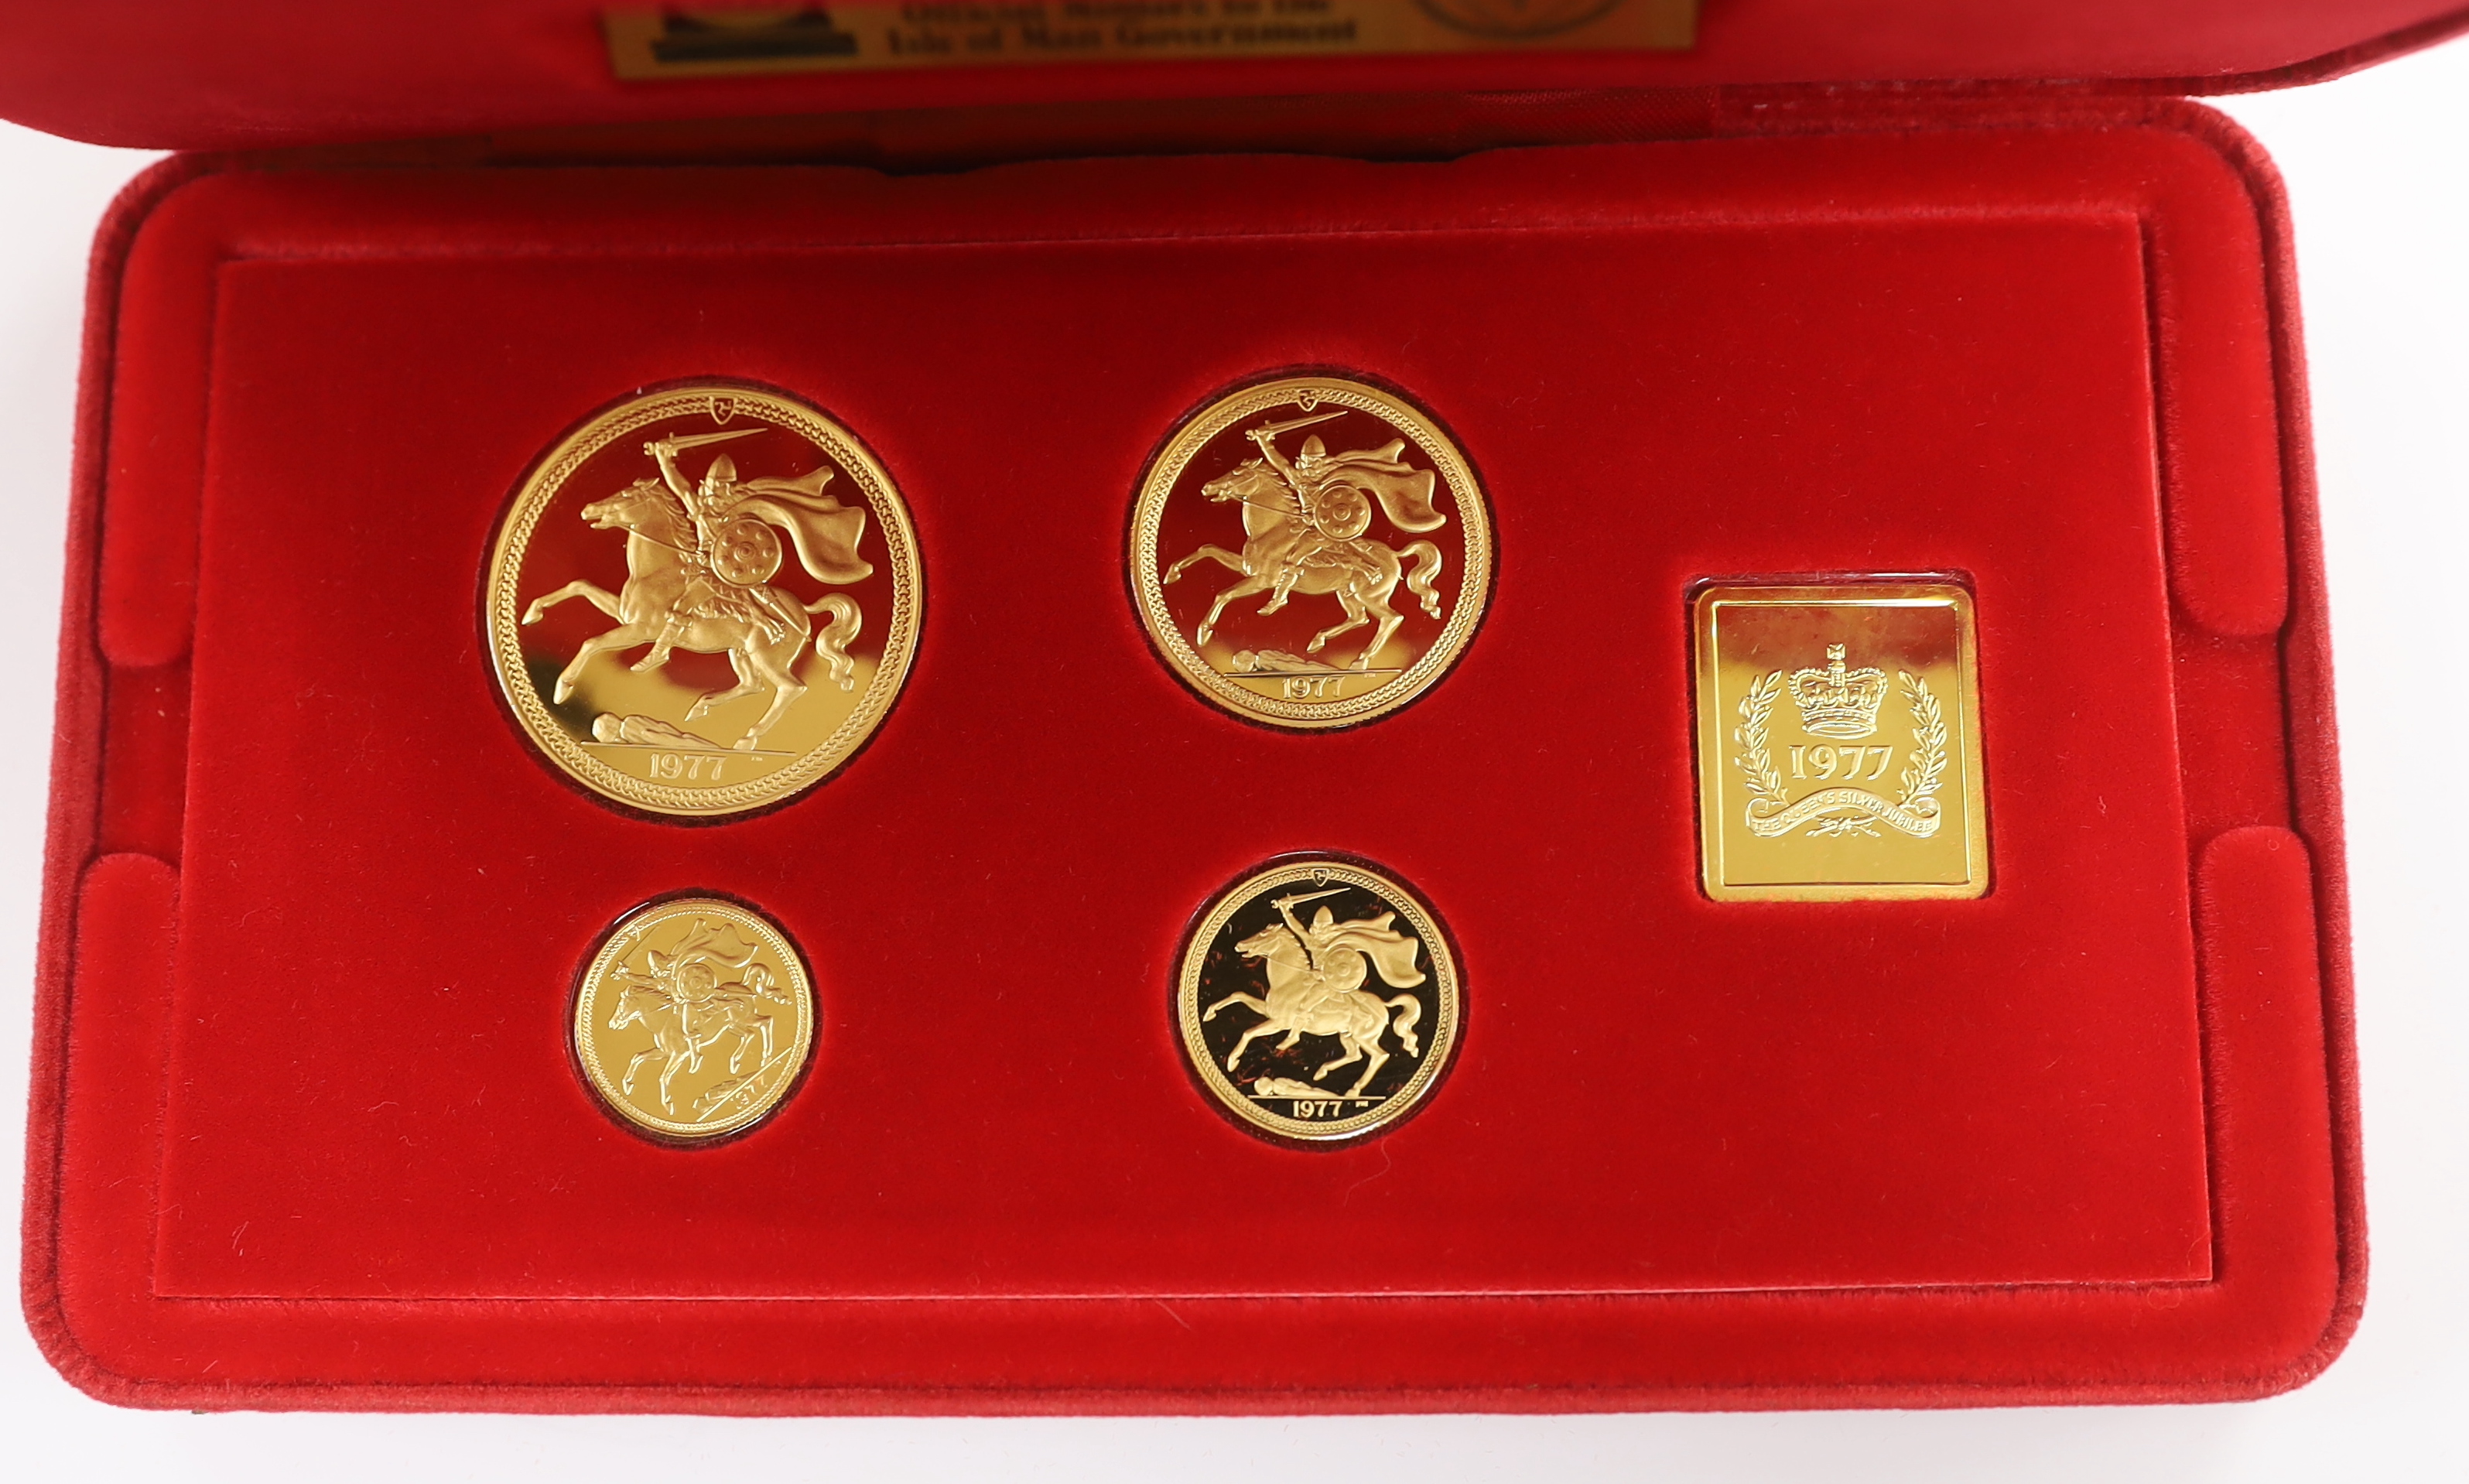 Gold coins - Isle of Man proof gold coin set, comprising half sovereign, sovereign, £2 and £5 coins, limited edition 1,250, in case of issue